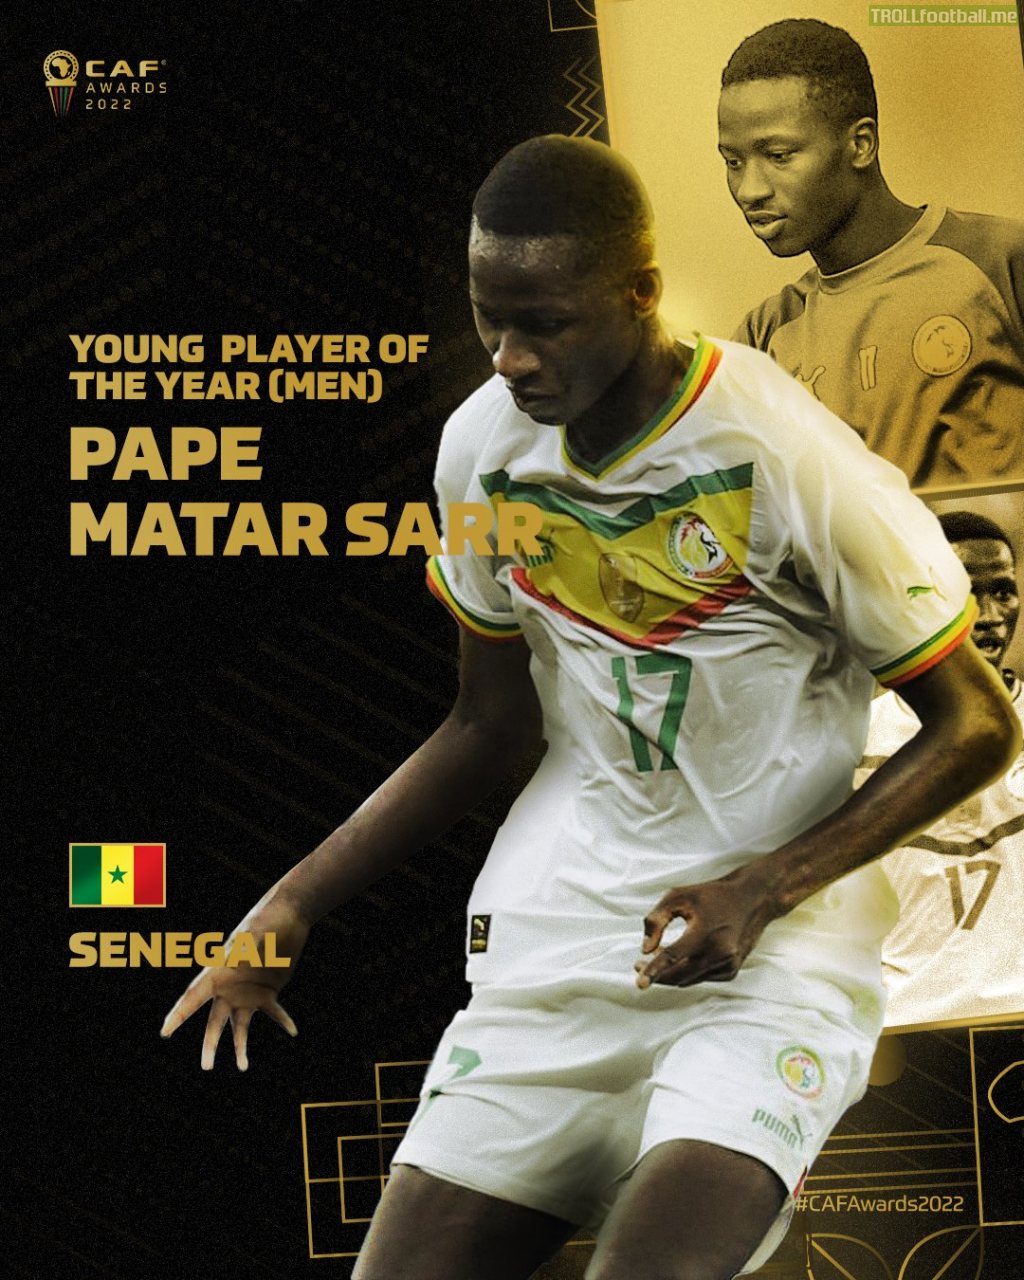 CAF Young player of the year (Pape Matar Sarr)